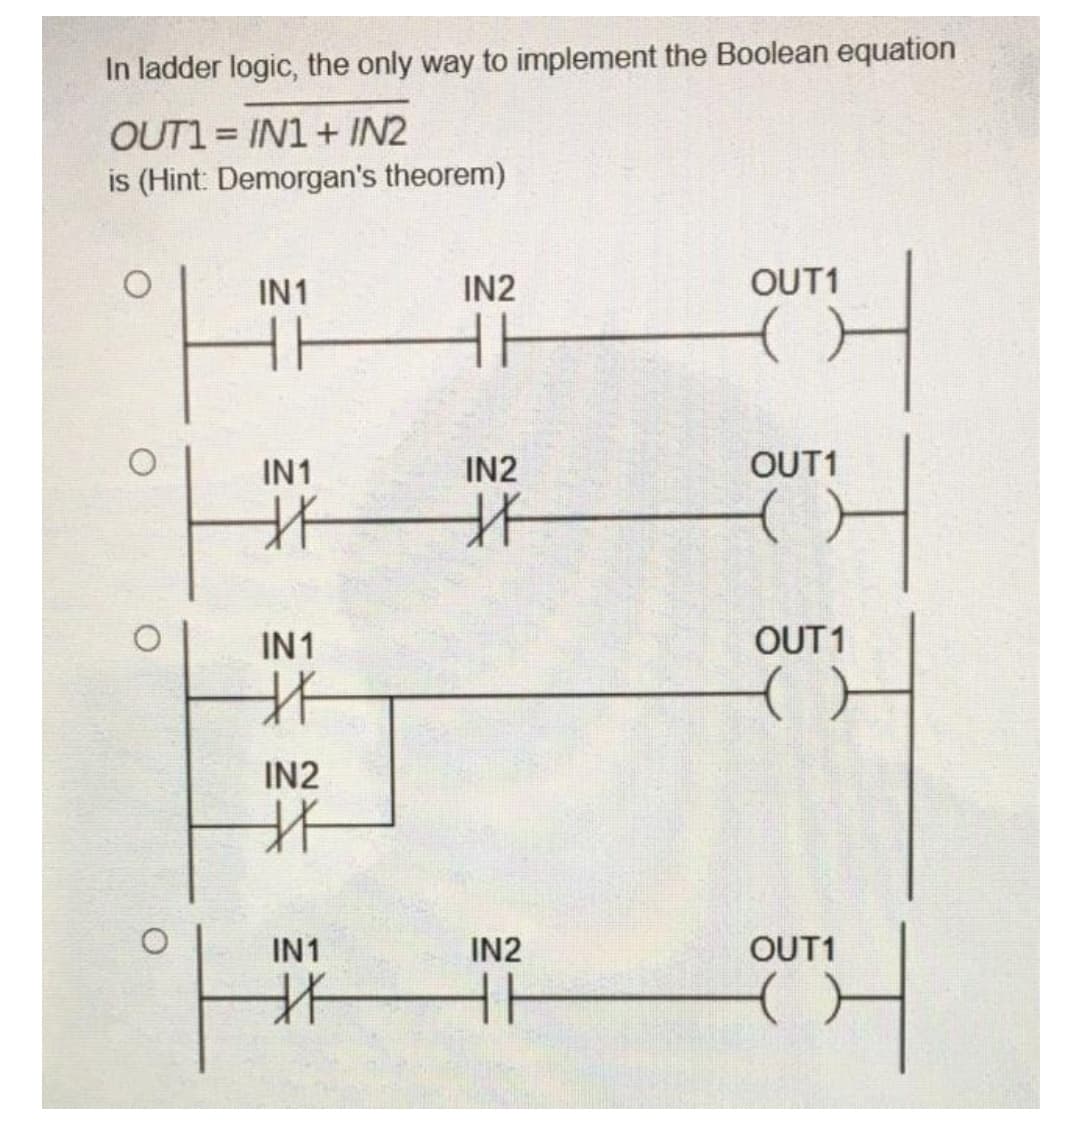 In ladder logic, the only way to implement the Boolean equation
OUT1 = IN1 + IN2
is (Hint: Demorgan's theorem)
IN1
IN2
OUT1
IN1
IN2
OUT1
IN1
OUT 1
IN2
IN1
IN2
OUT1
北
O.
